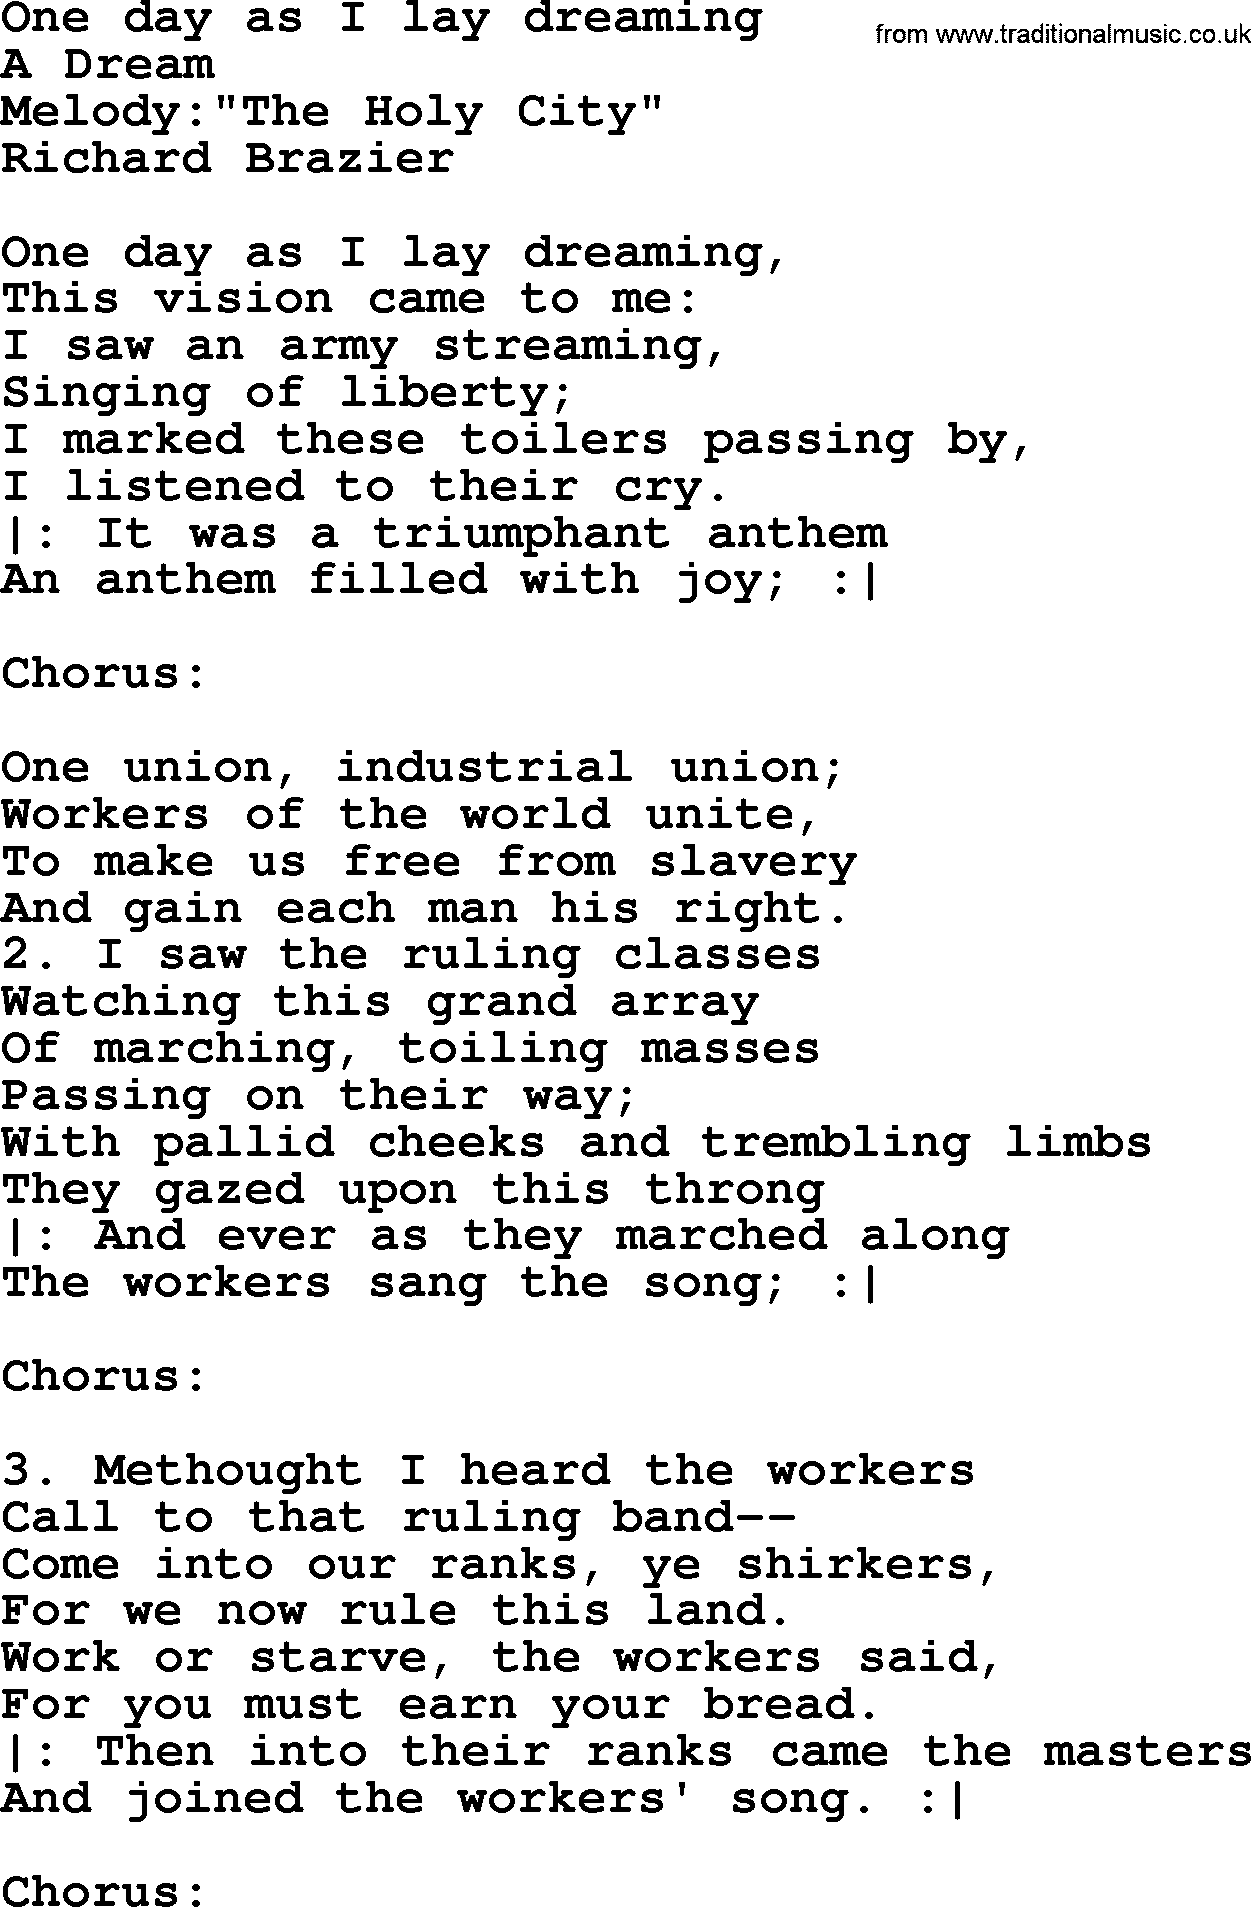 Political, Solidarity, Workers or Union song: One Day As I Lay Dreaming, lyrics